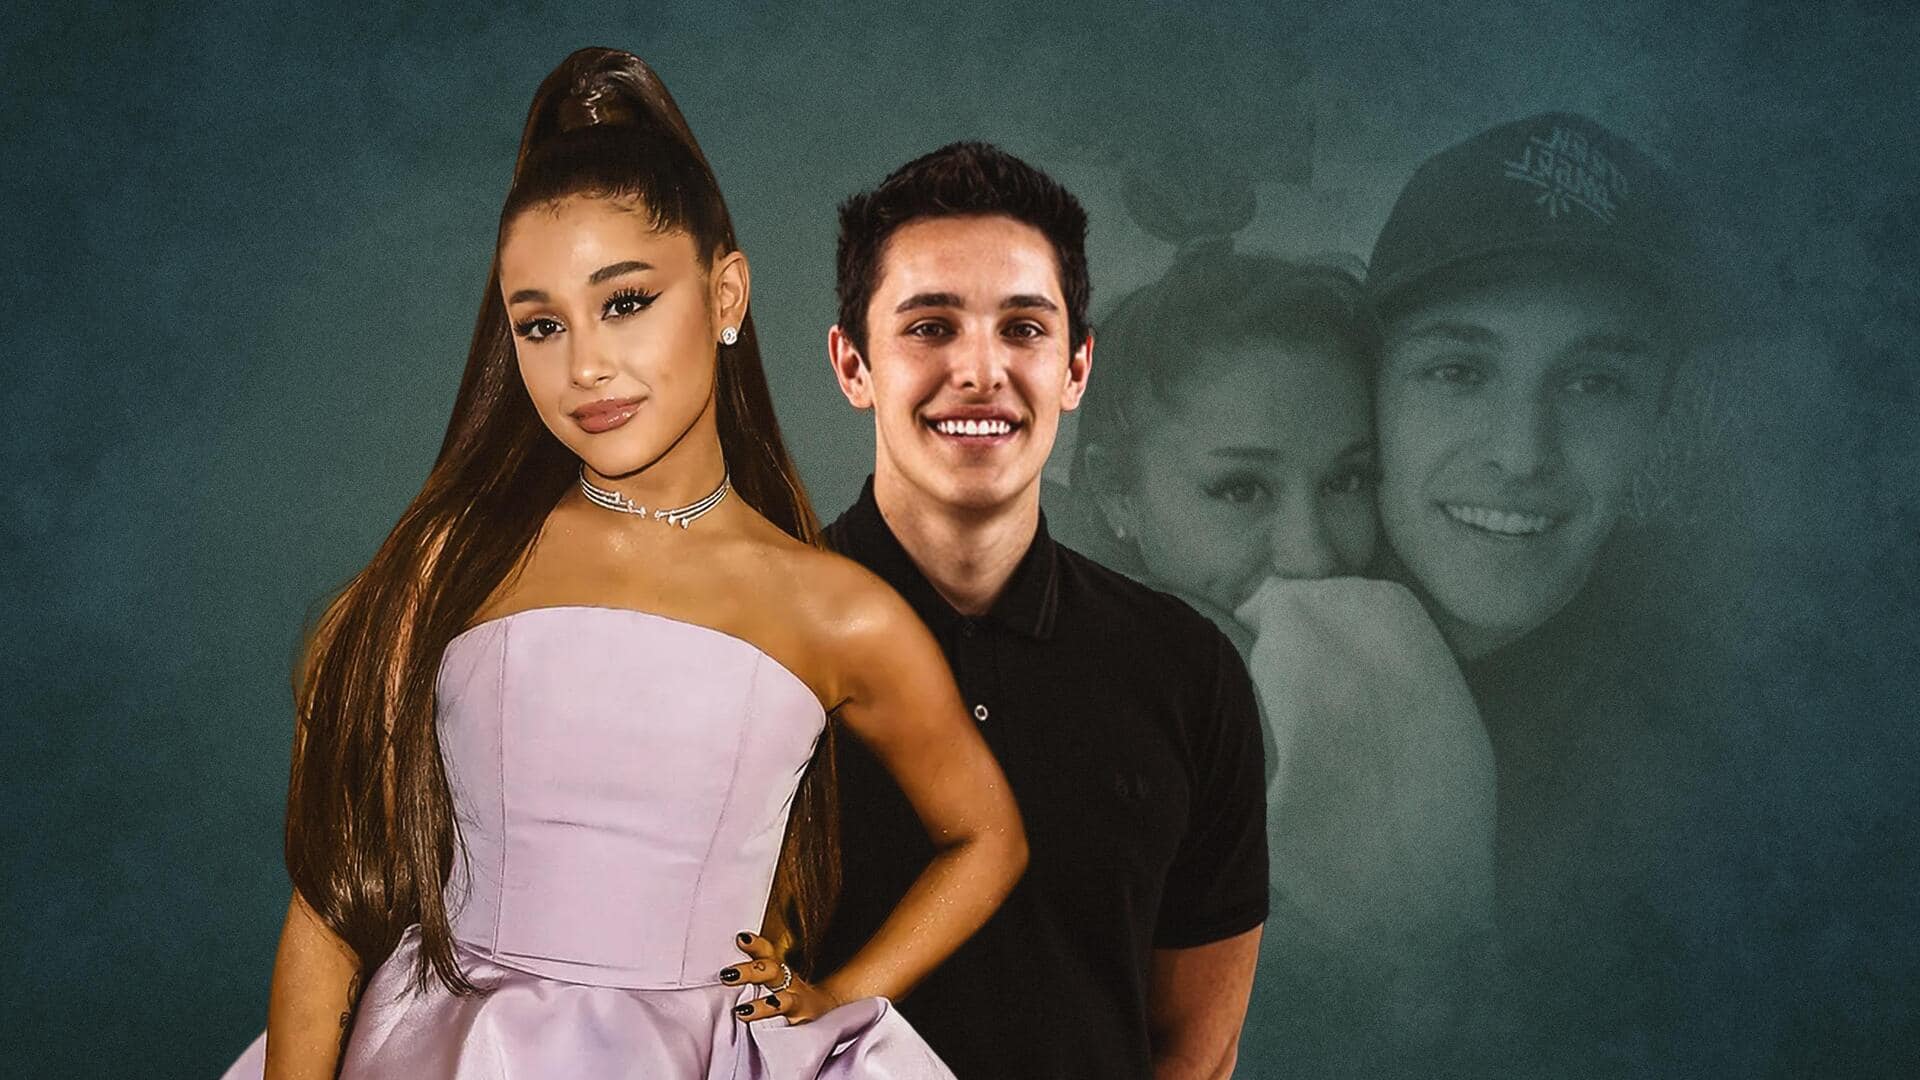 Dating to divorce, all about Ariana Grande-Dalton Gomez's relationship